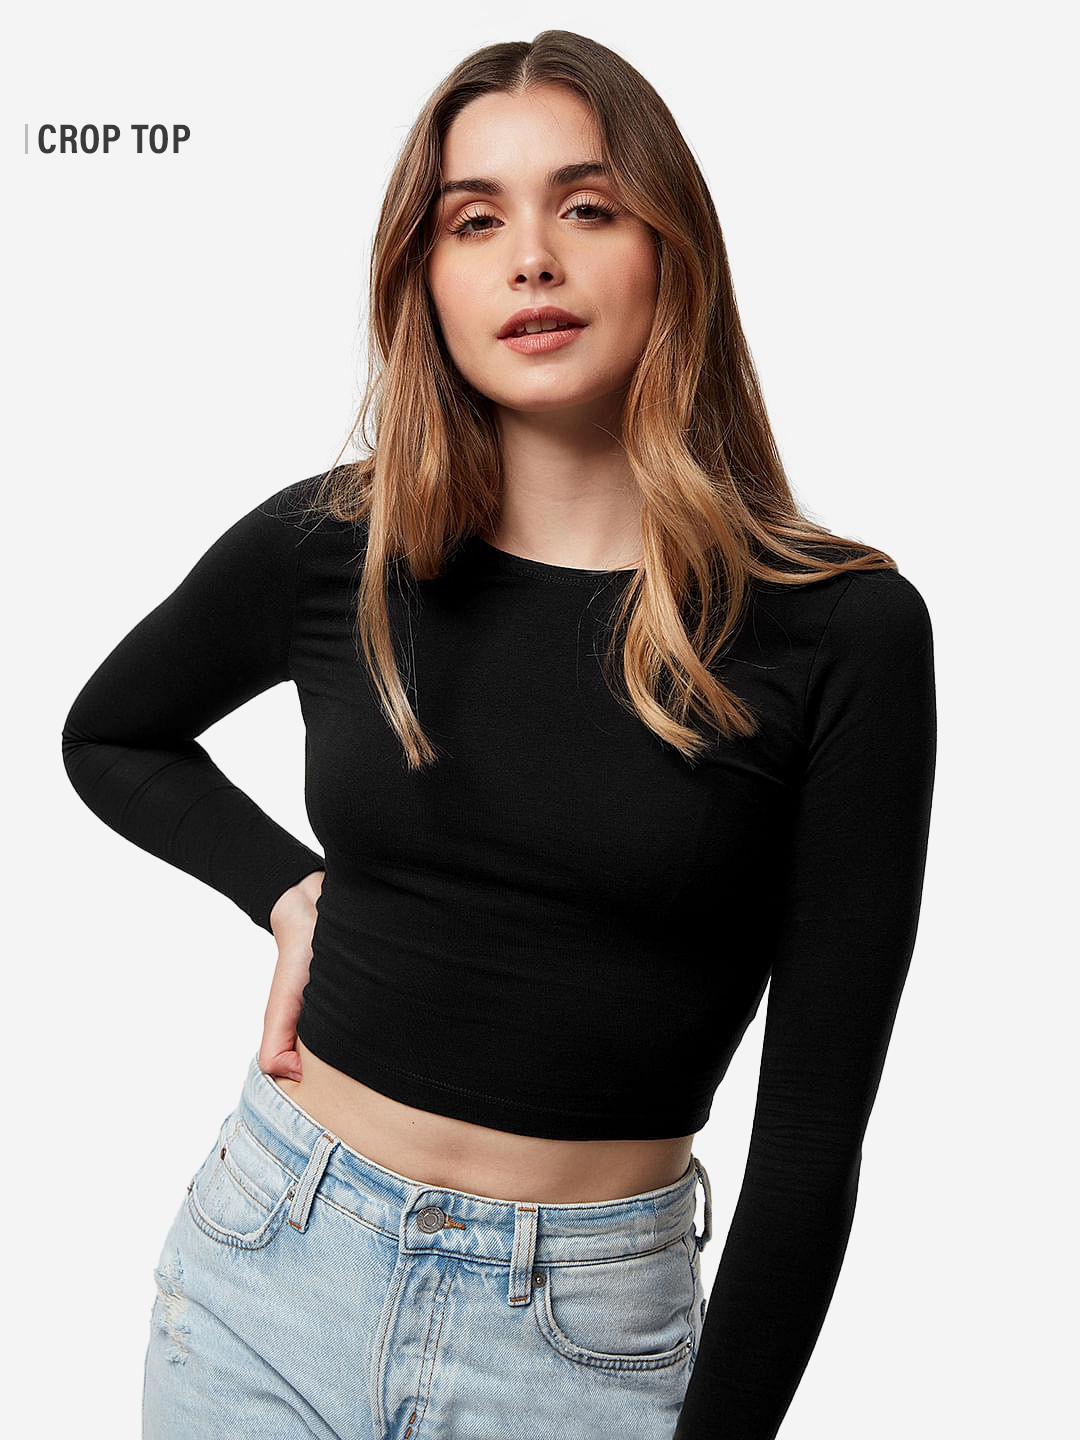 Women's Solids: Black (Cropped Fit) Women's Cropped Tops